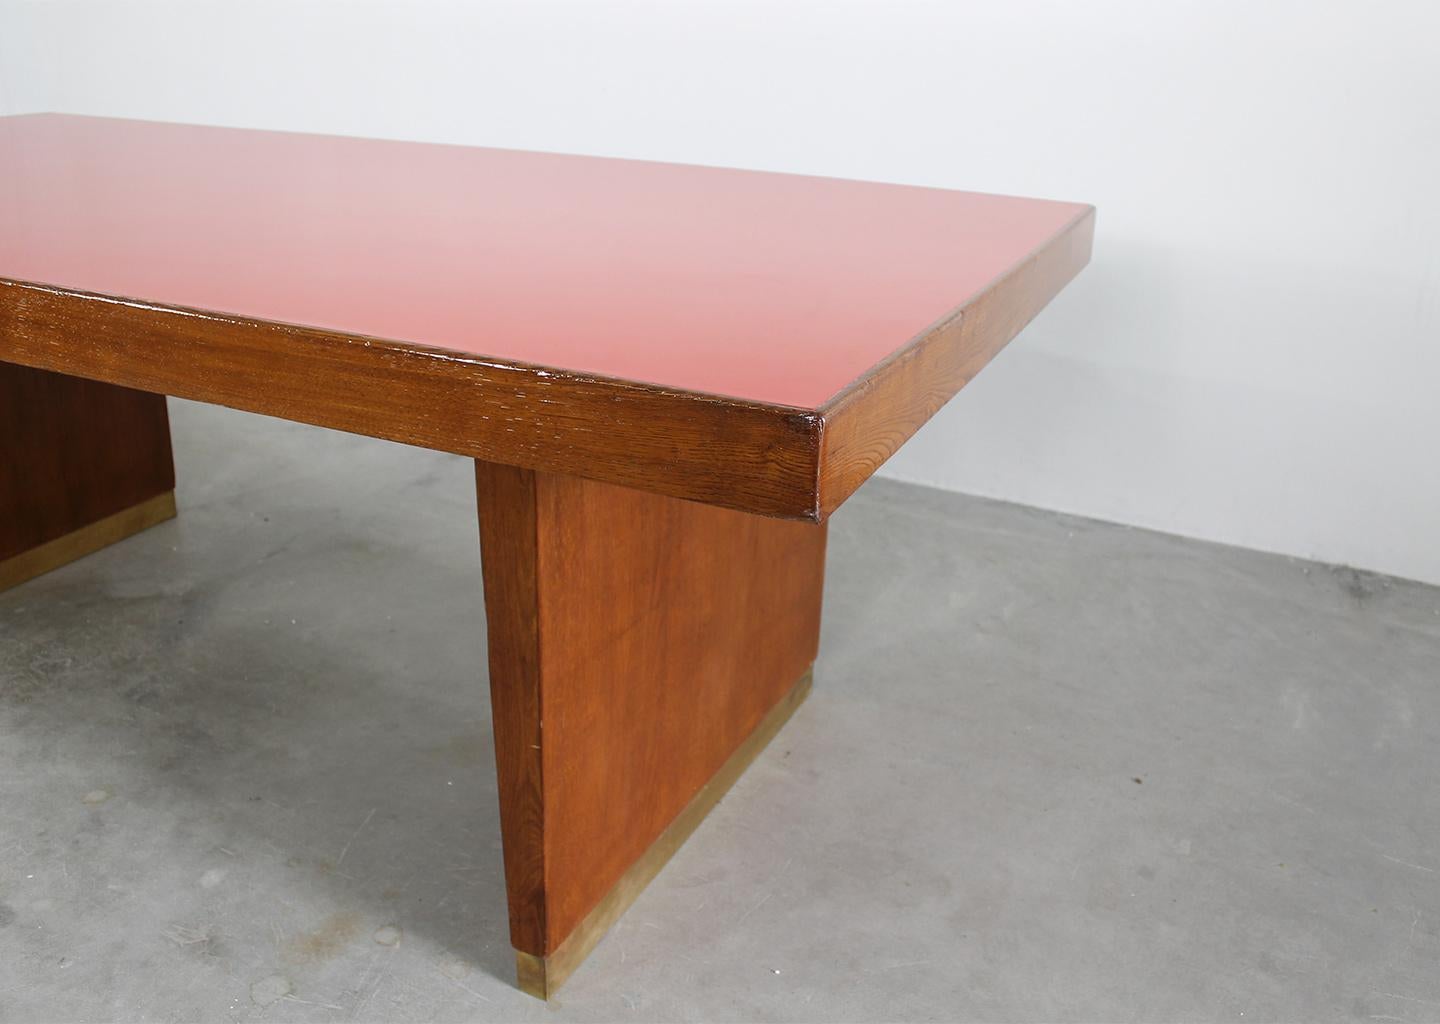 Gio Ponti Table in Oak Brass and Red Laminate Italian Manifacture 1950s For Sale 2